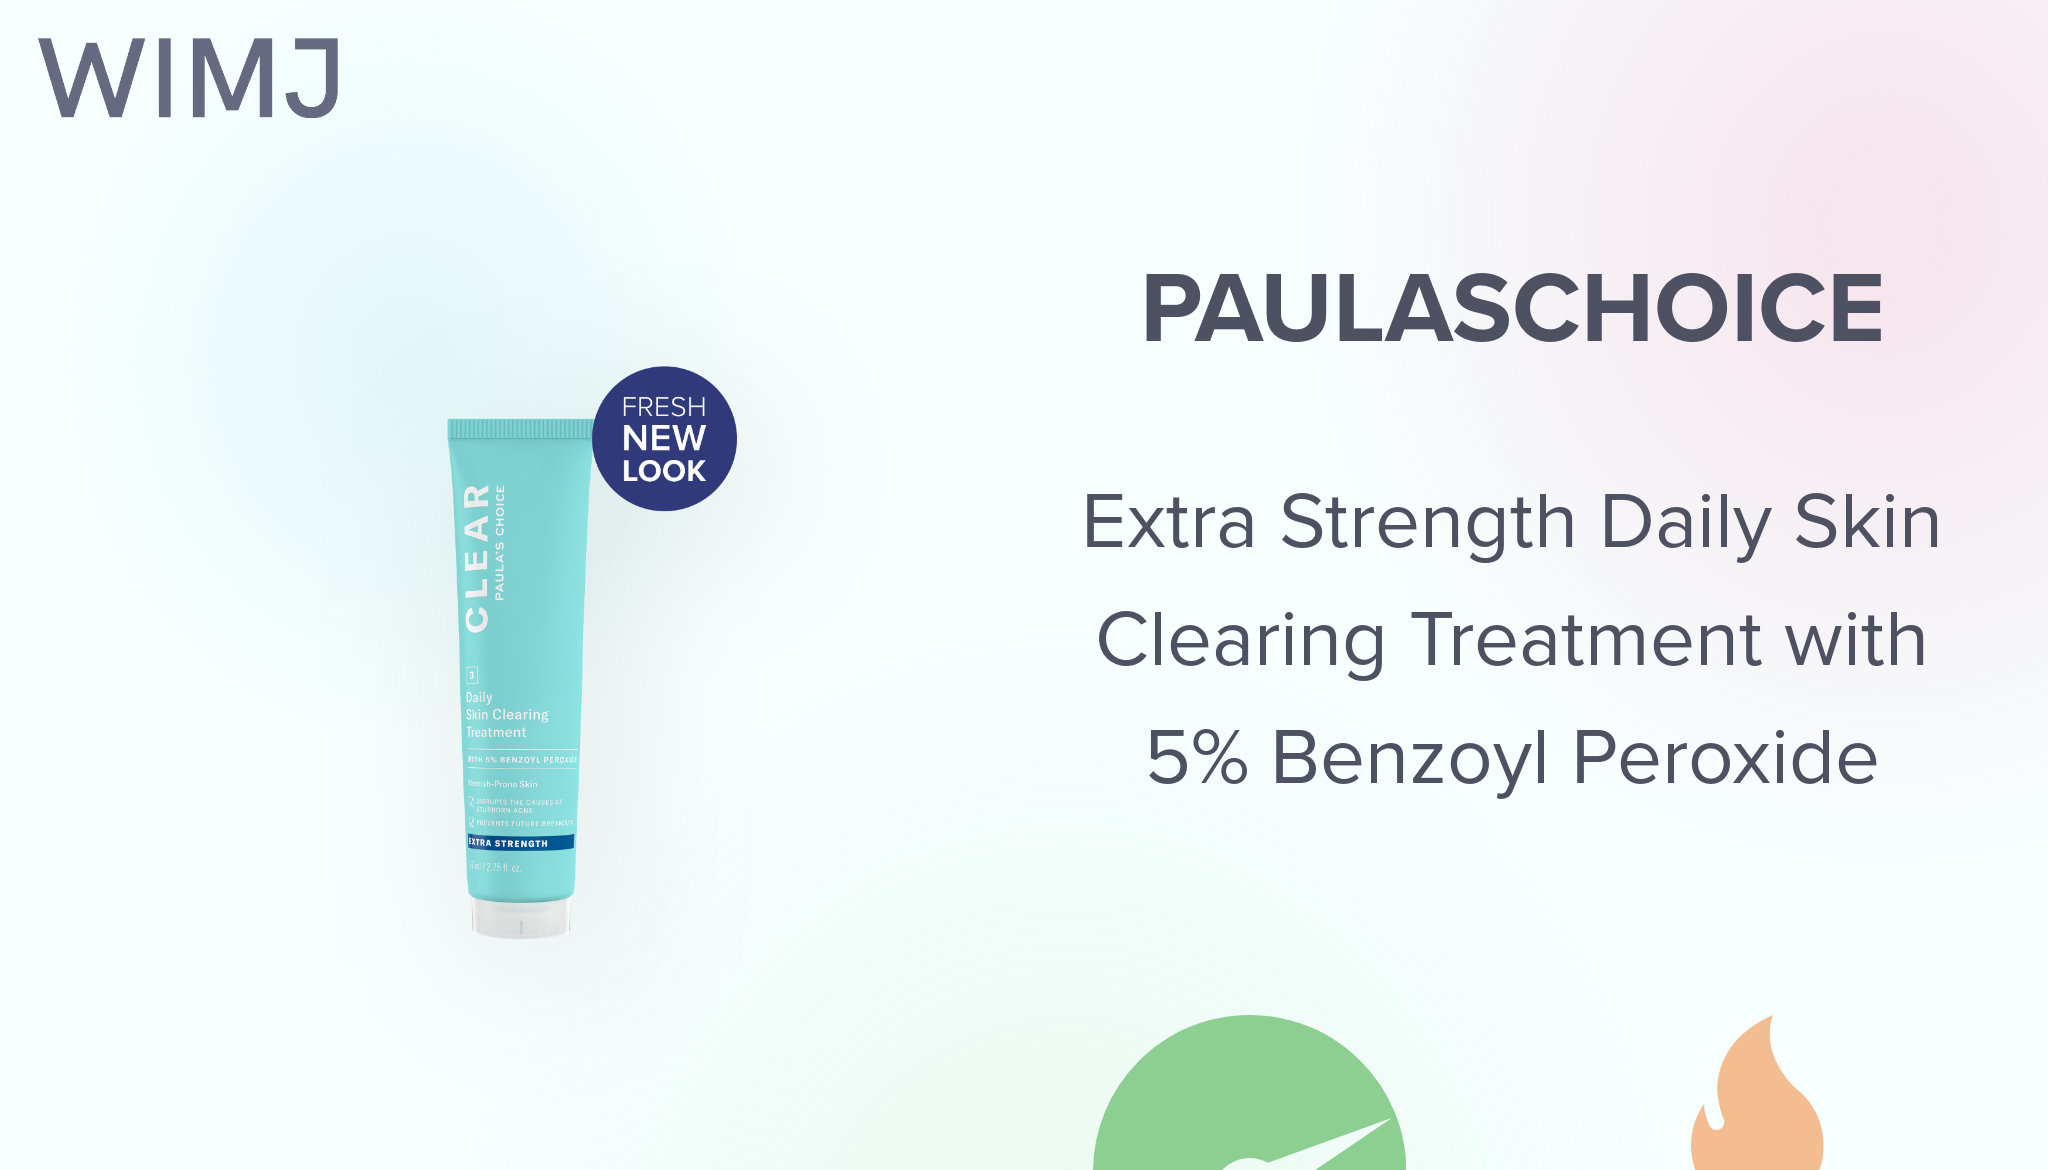 Review: Paulaschoice - Extra Strength Daily Skin Clearing Treatment with 5% Benzoyl Peroxide